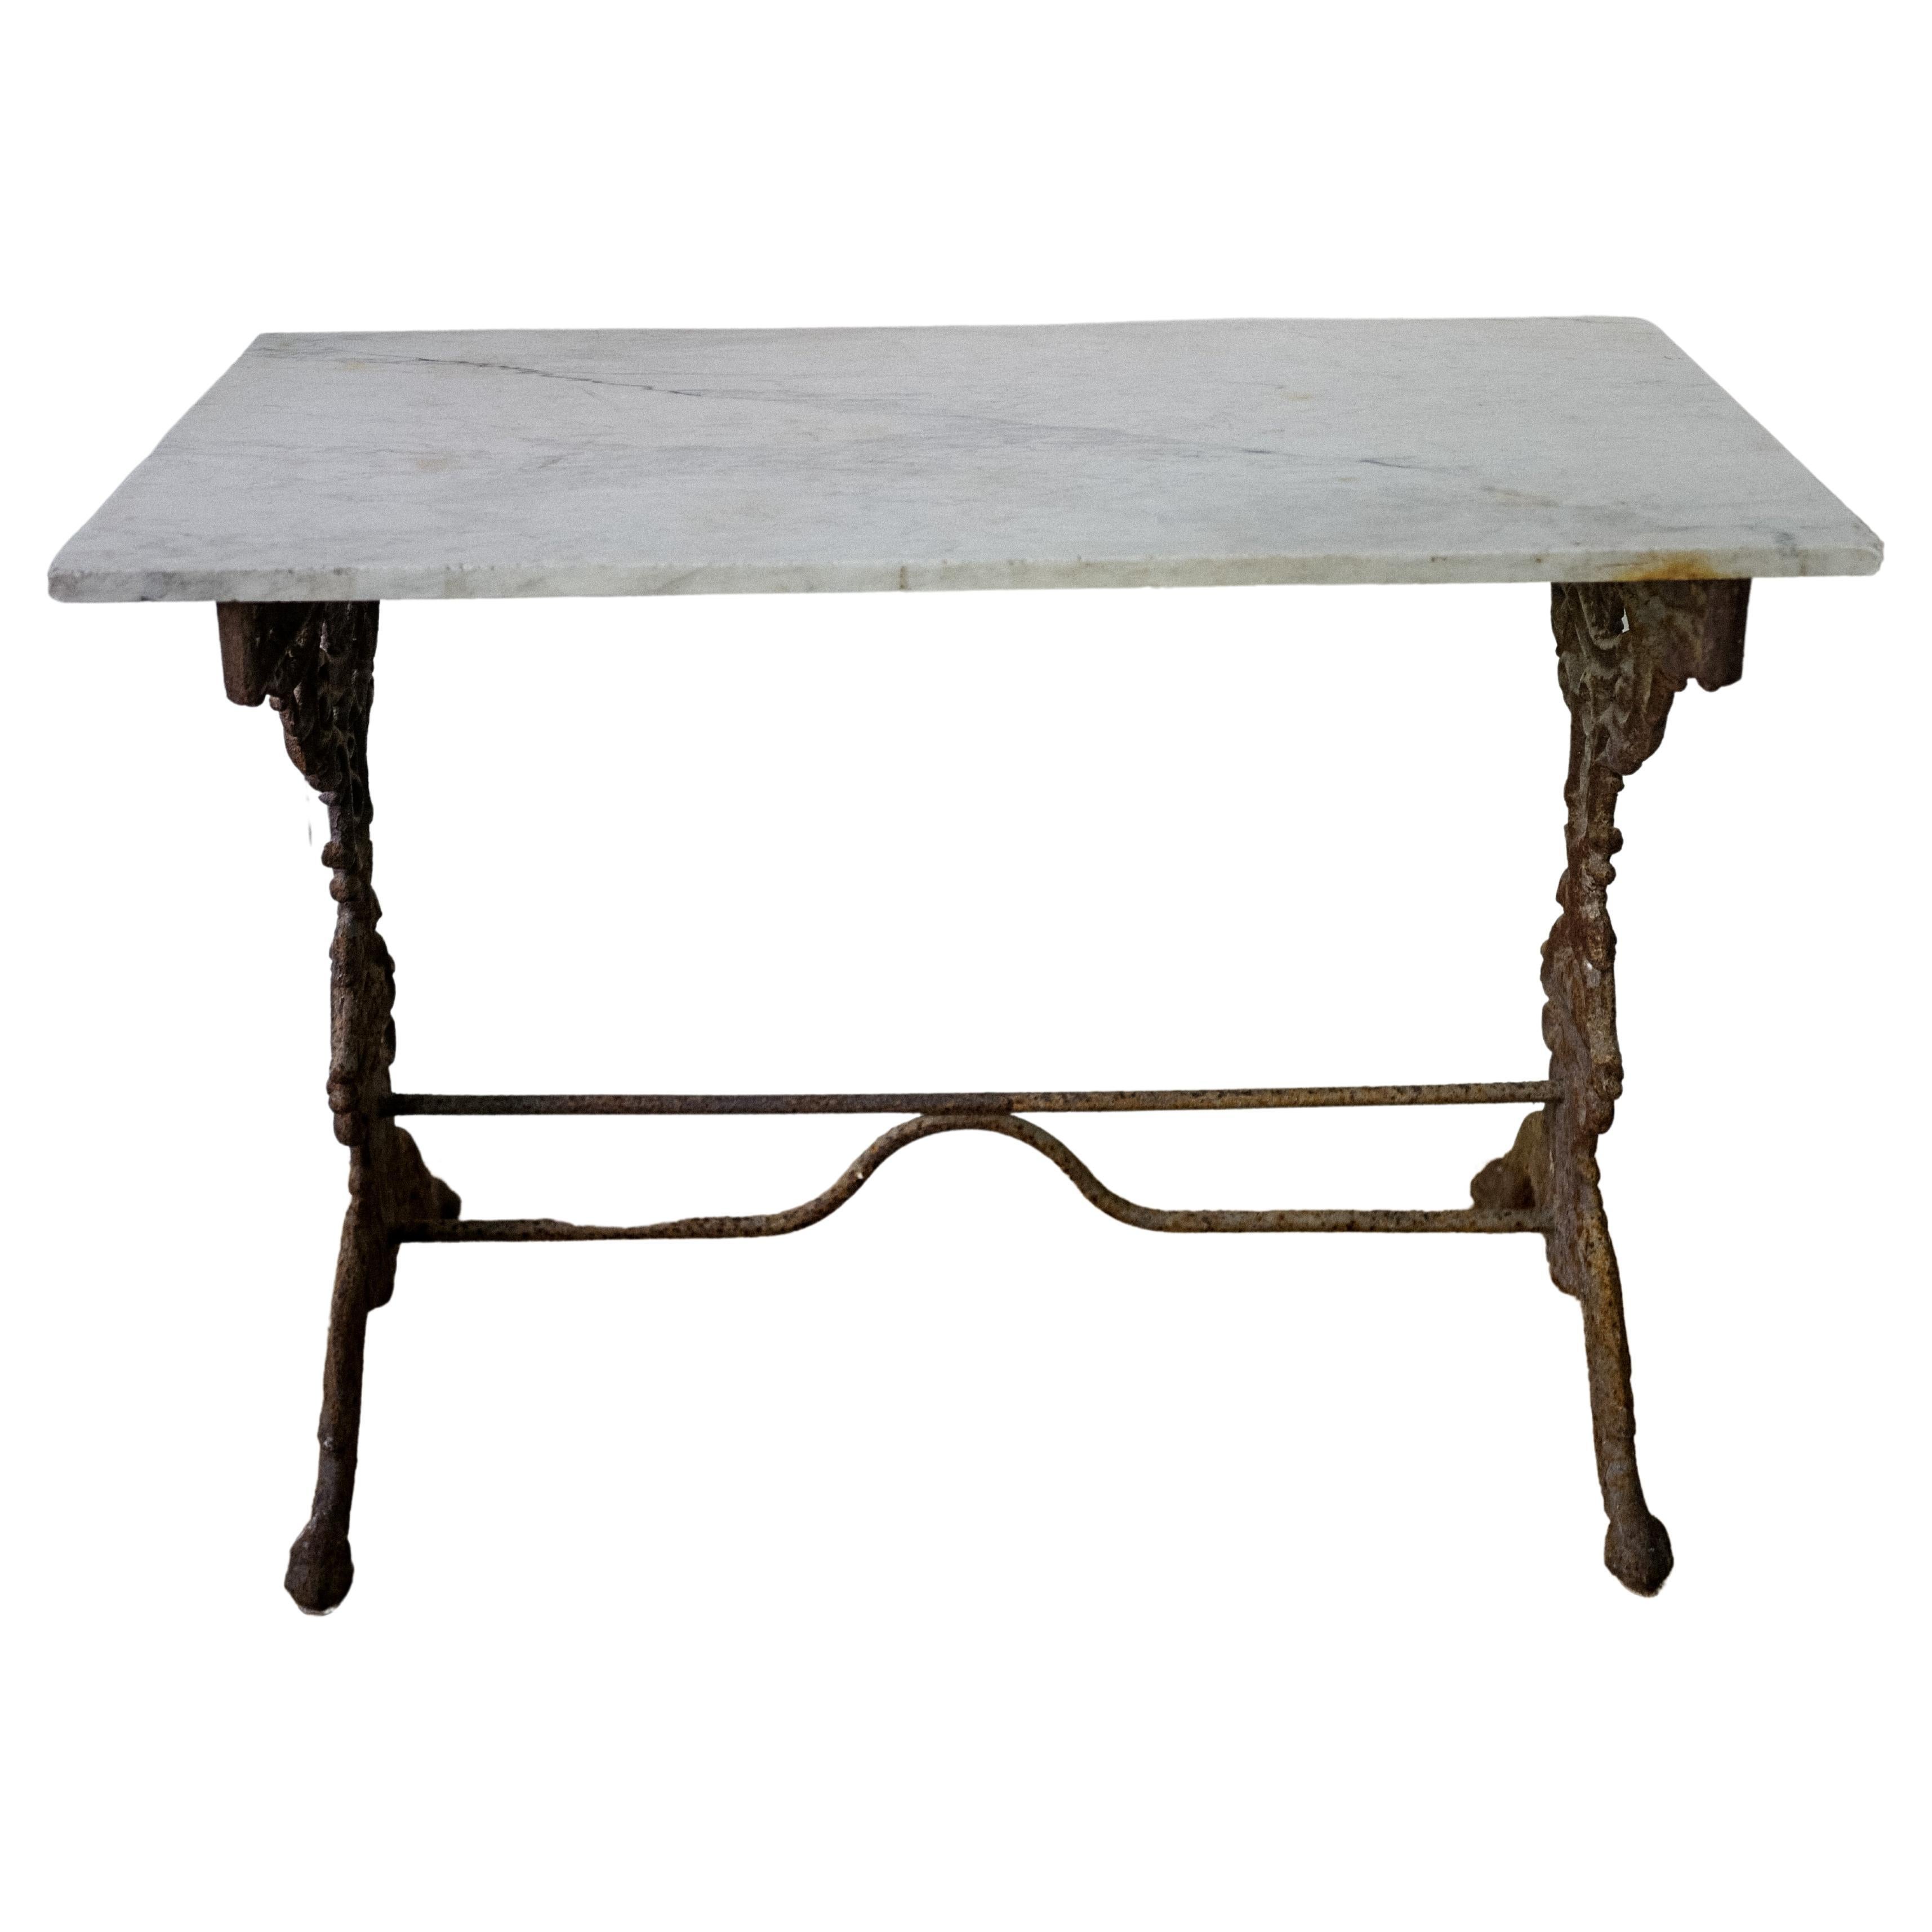 19th Century Italian Carrera Marble and Iron Console Table For Sale